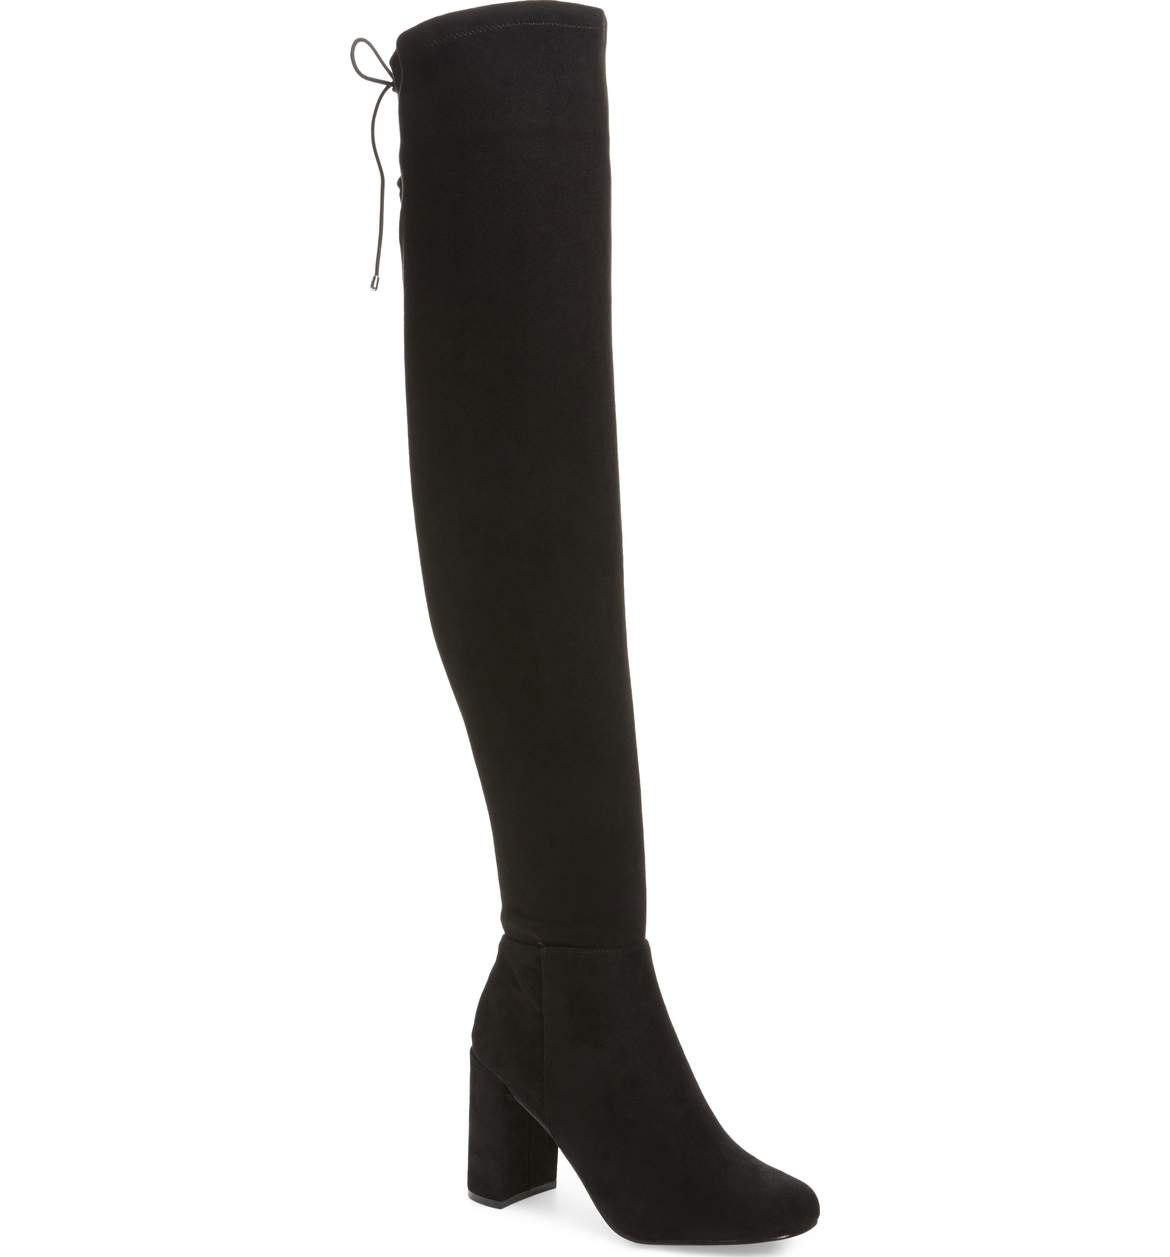 Chinese Laundry Over the Knee Boots.jpg